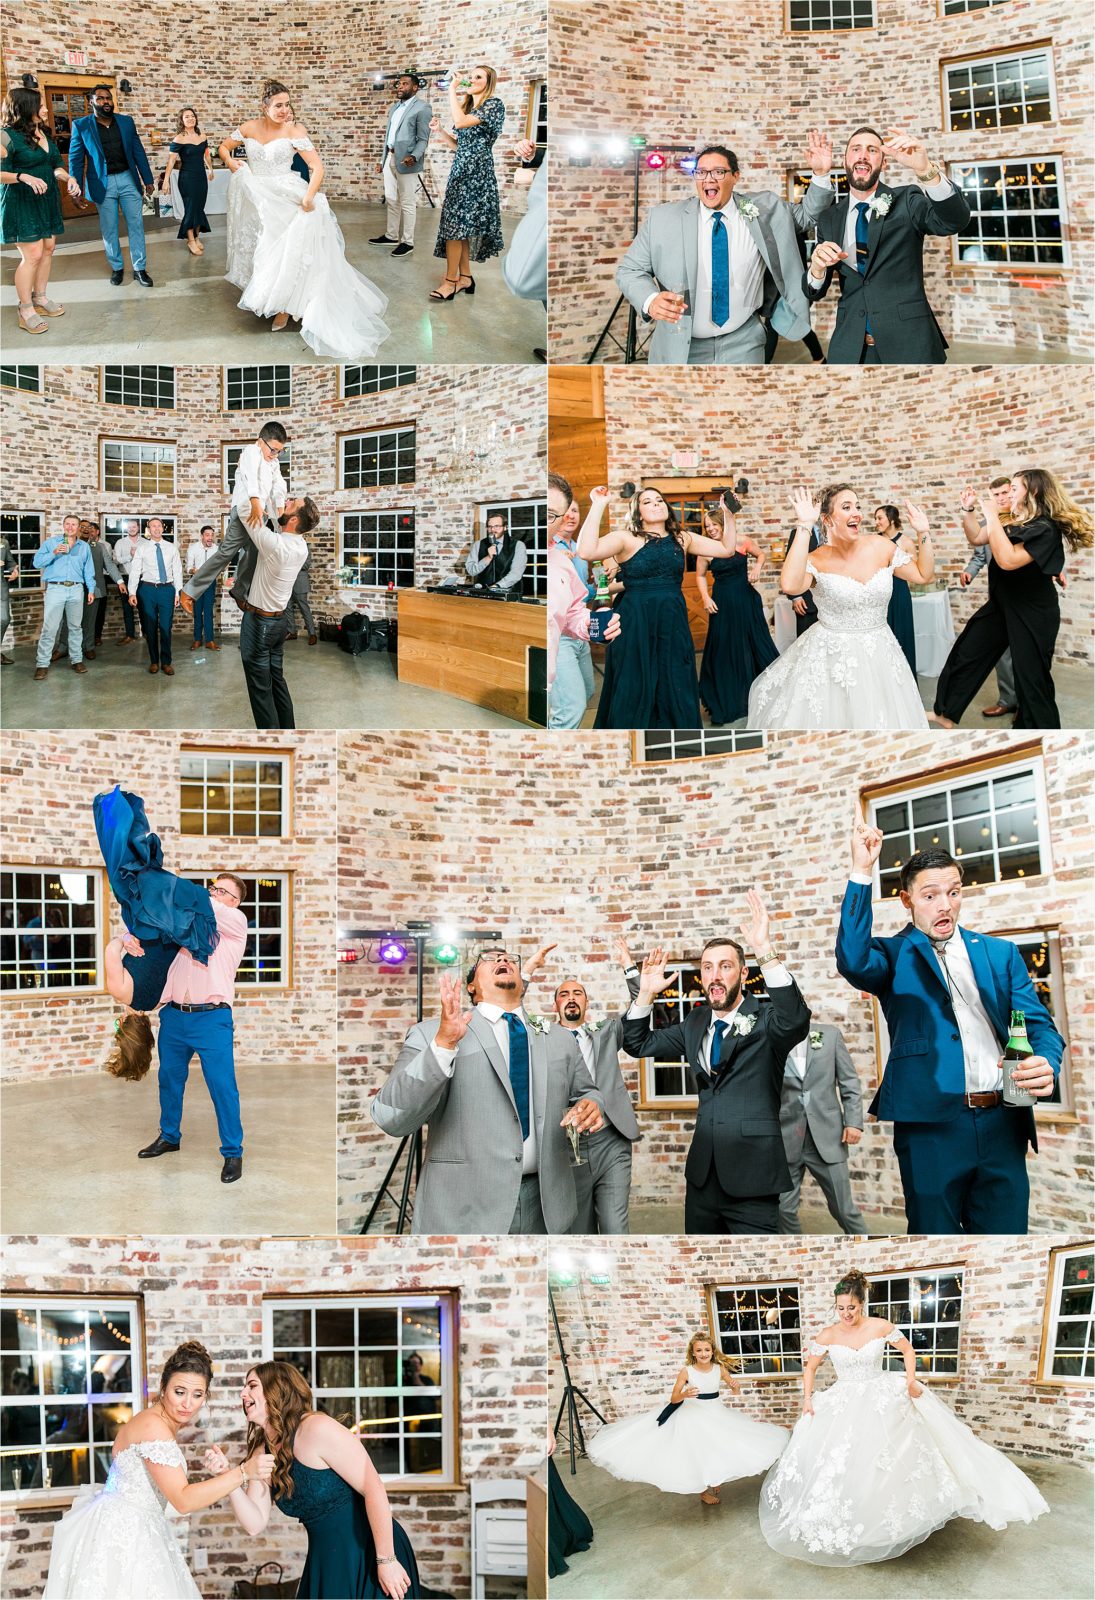 A newlywed couple dances the night away with their guests during their rustic grace wedding reception near McKinney, Texas 